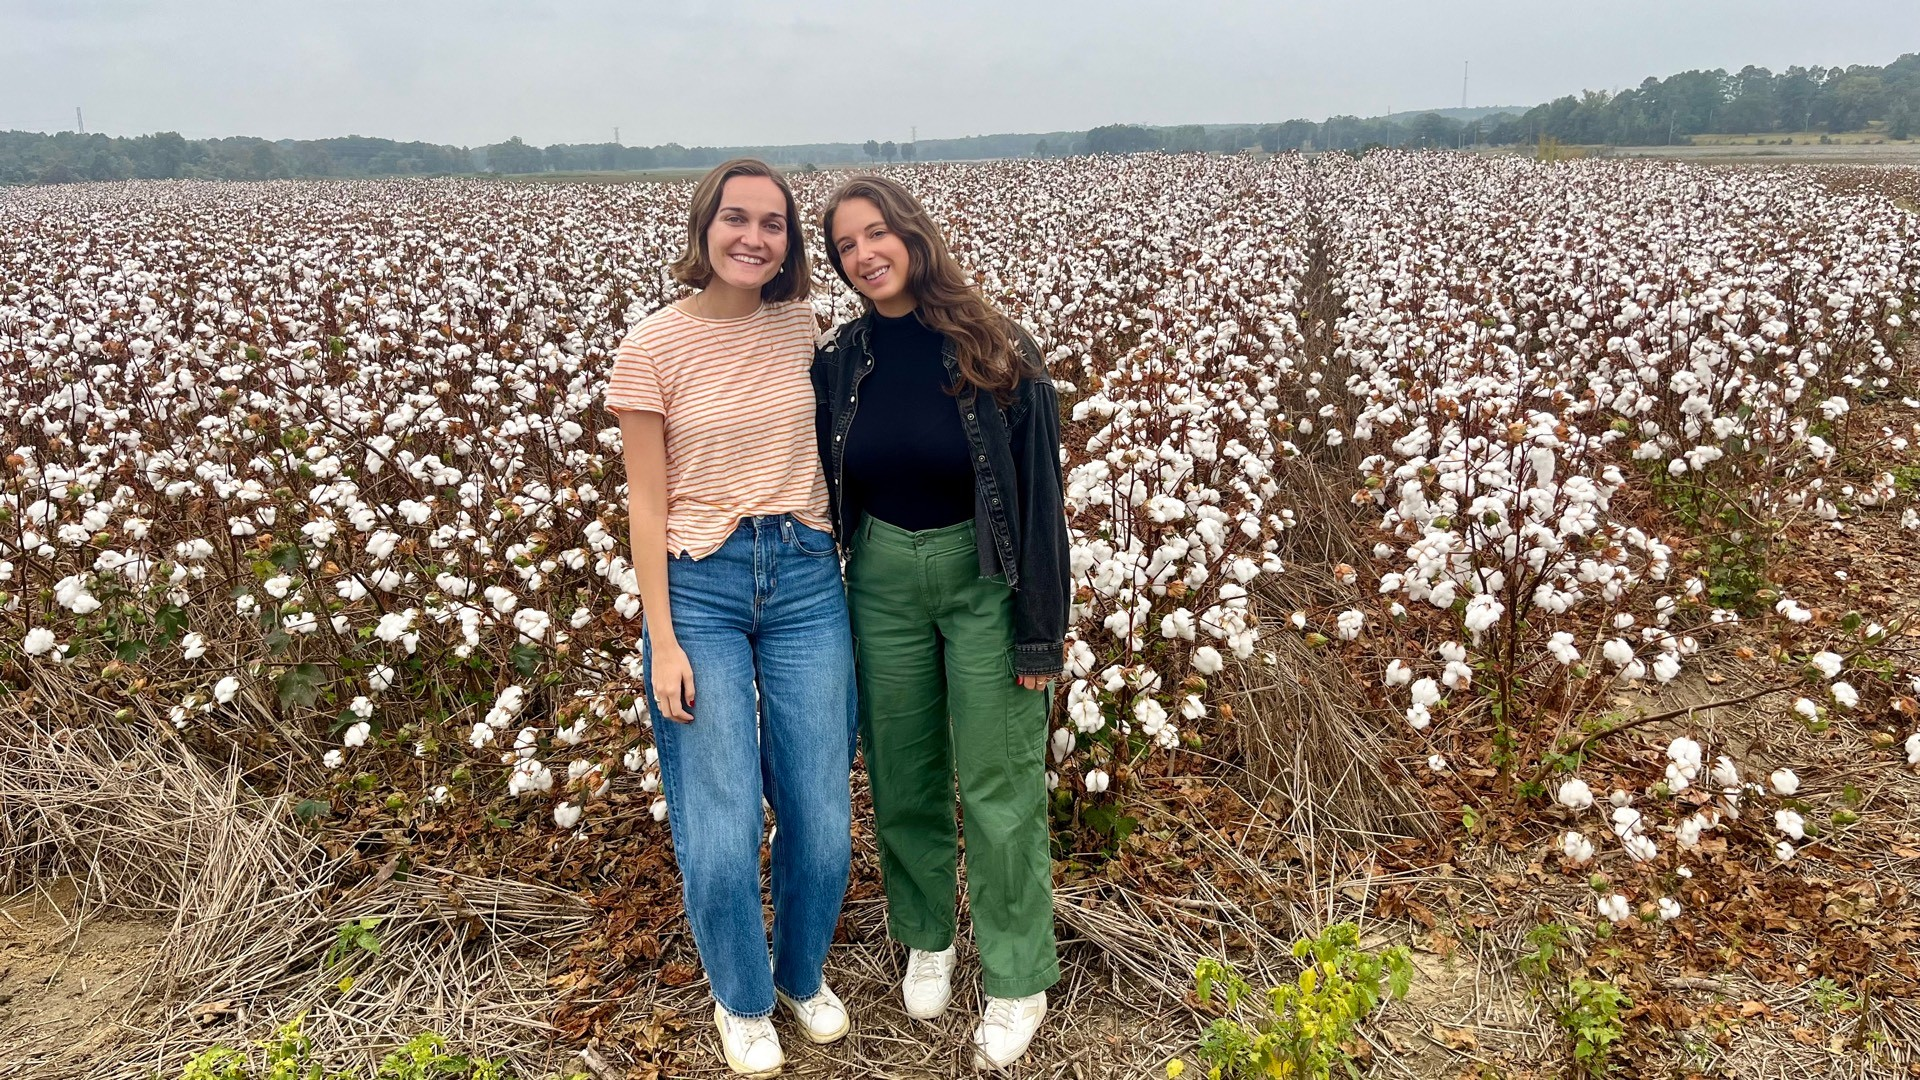 Jessie's team learning about advancements in regenerative agriculture practices in the cotton industry in Mississippi.